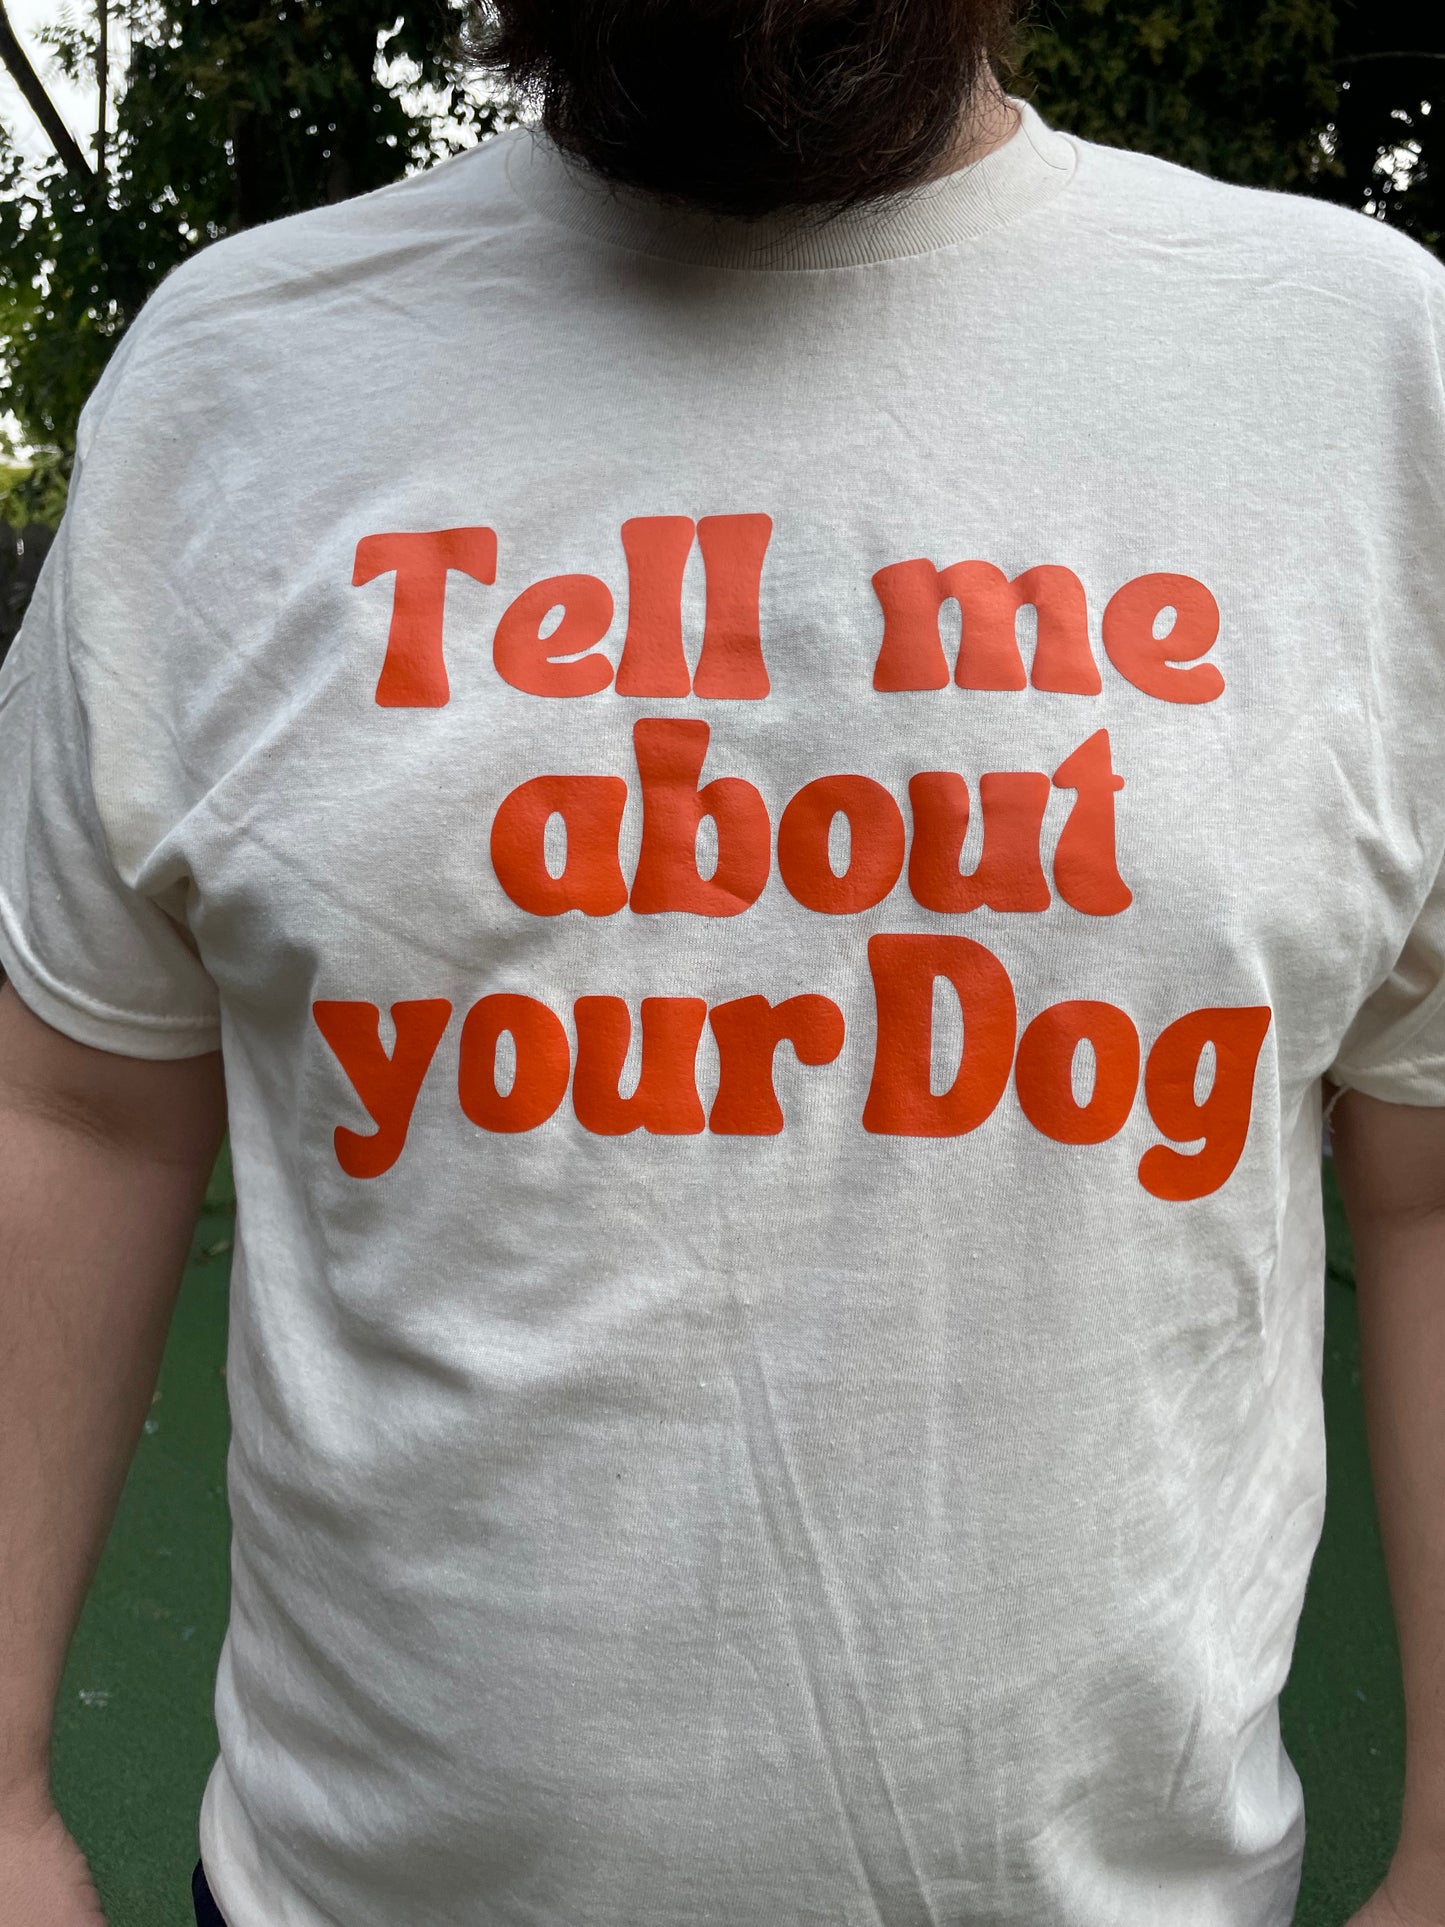 TELL ME ABOUT YOUR DOG T-SHIRT